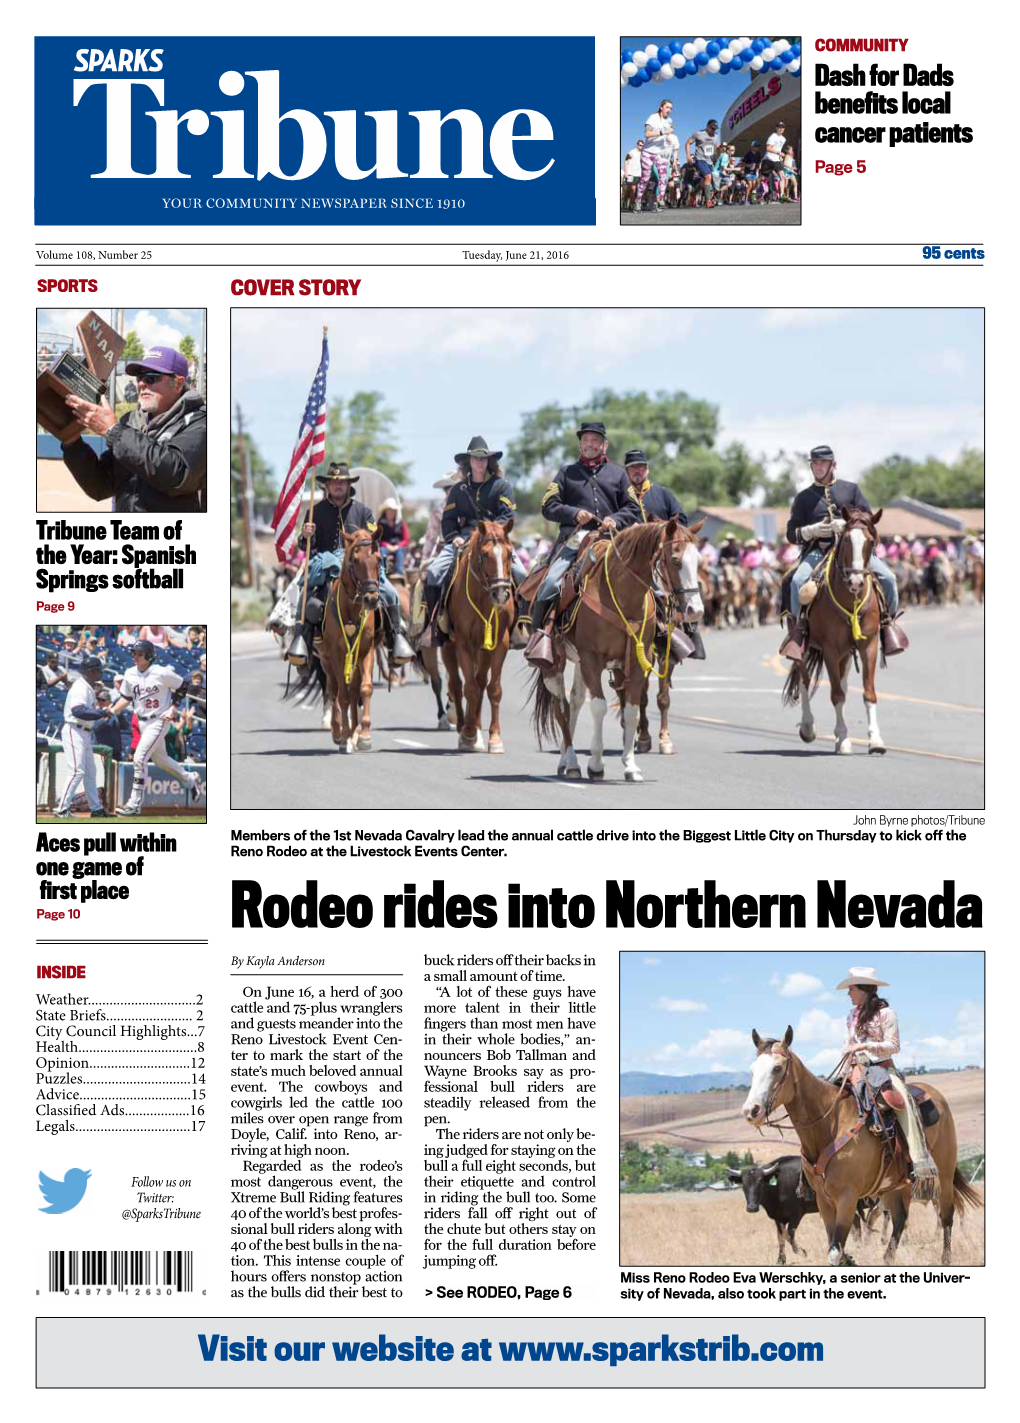 Rodeo Rides Into Northern Nevada